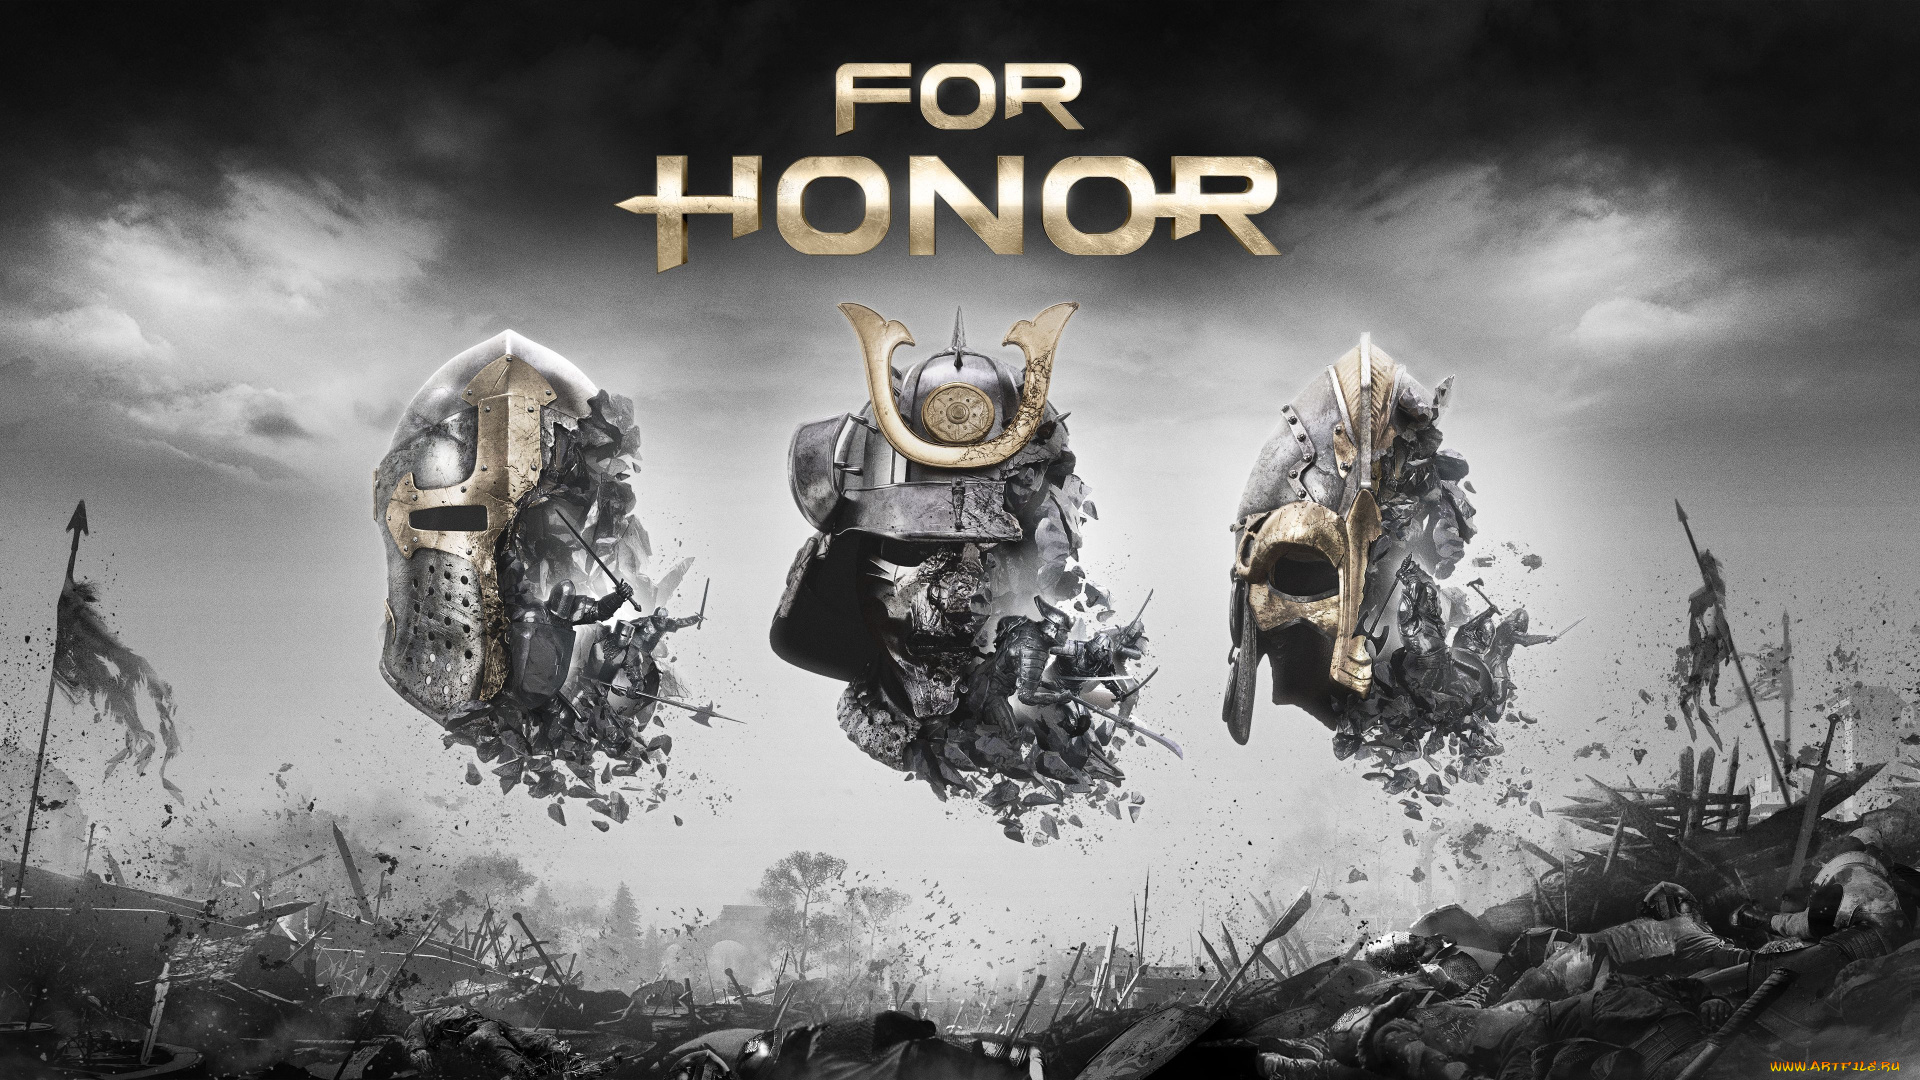 for, honor, видео, игры, -, for, honor, for, honor, за, честь, ролевая, action